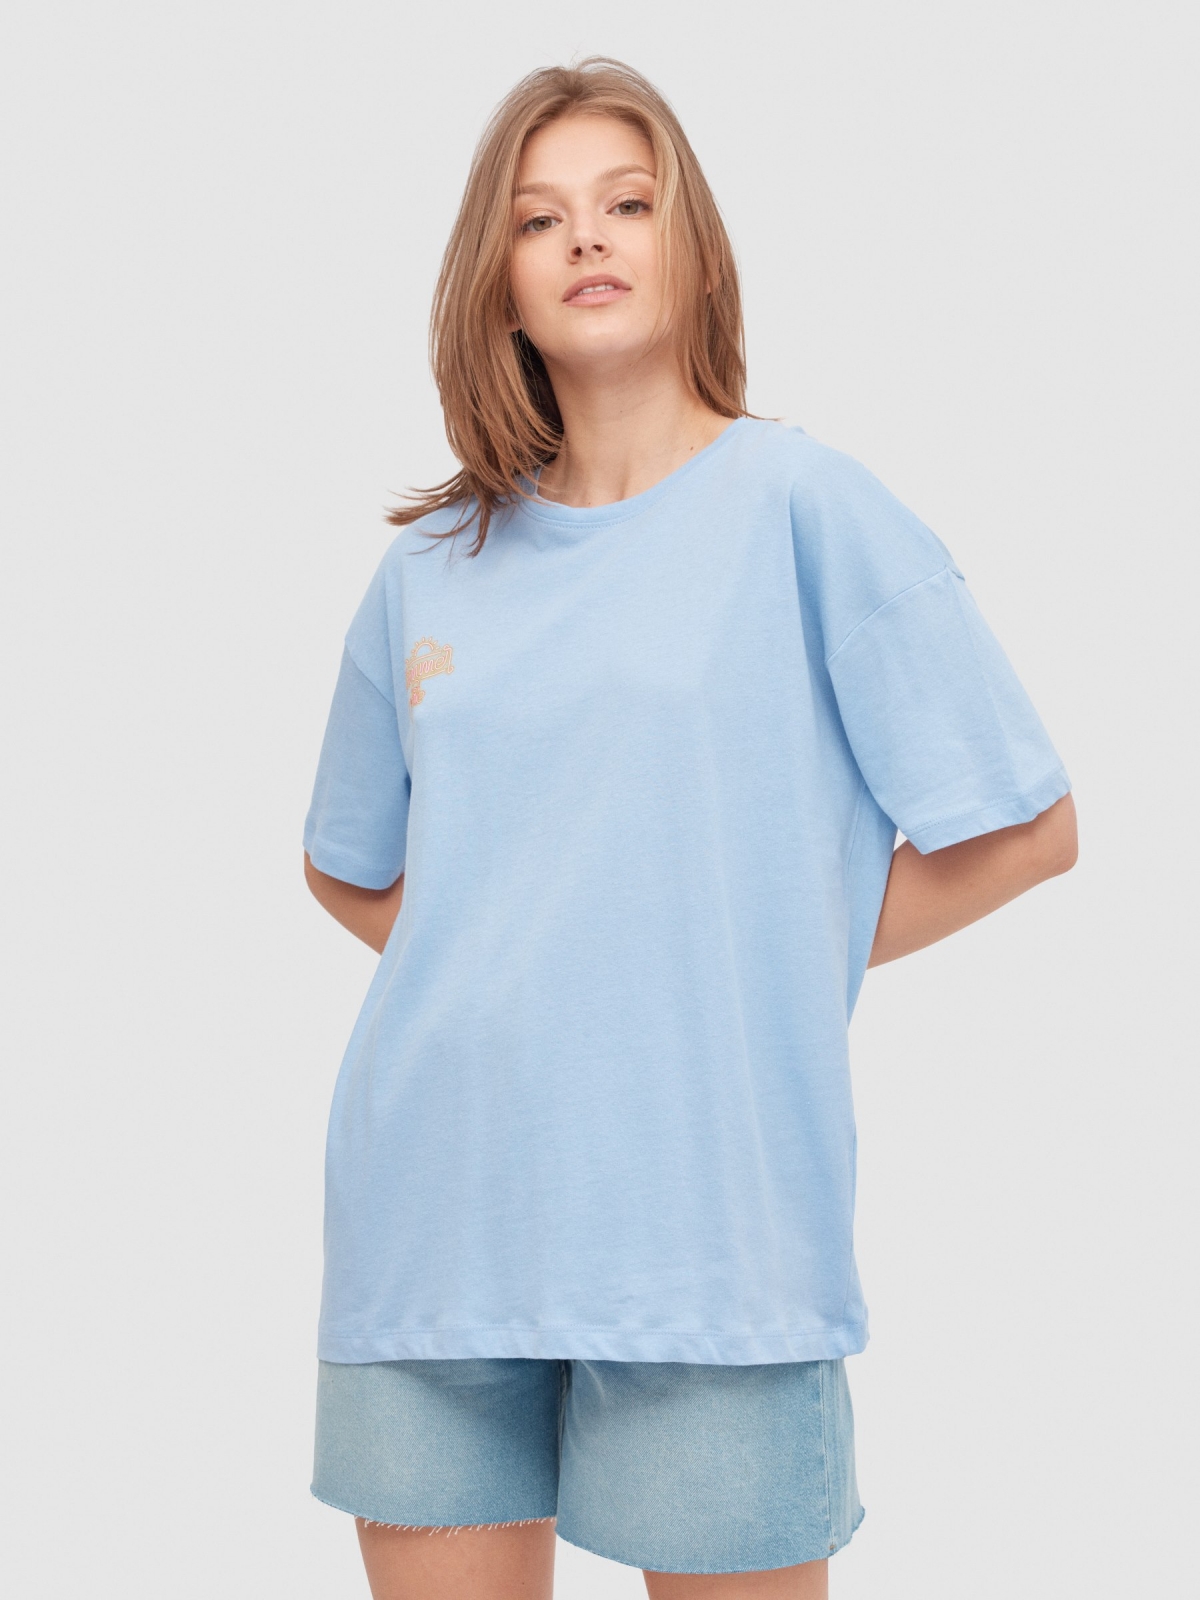 Flamingo oversize t-shirt blue middle front view